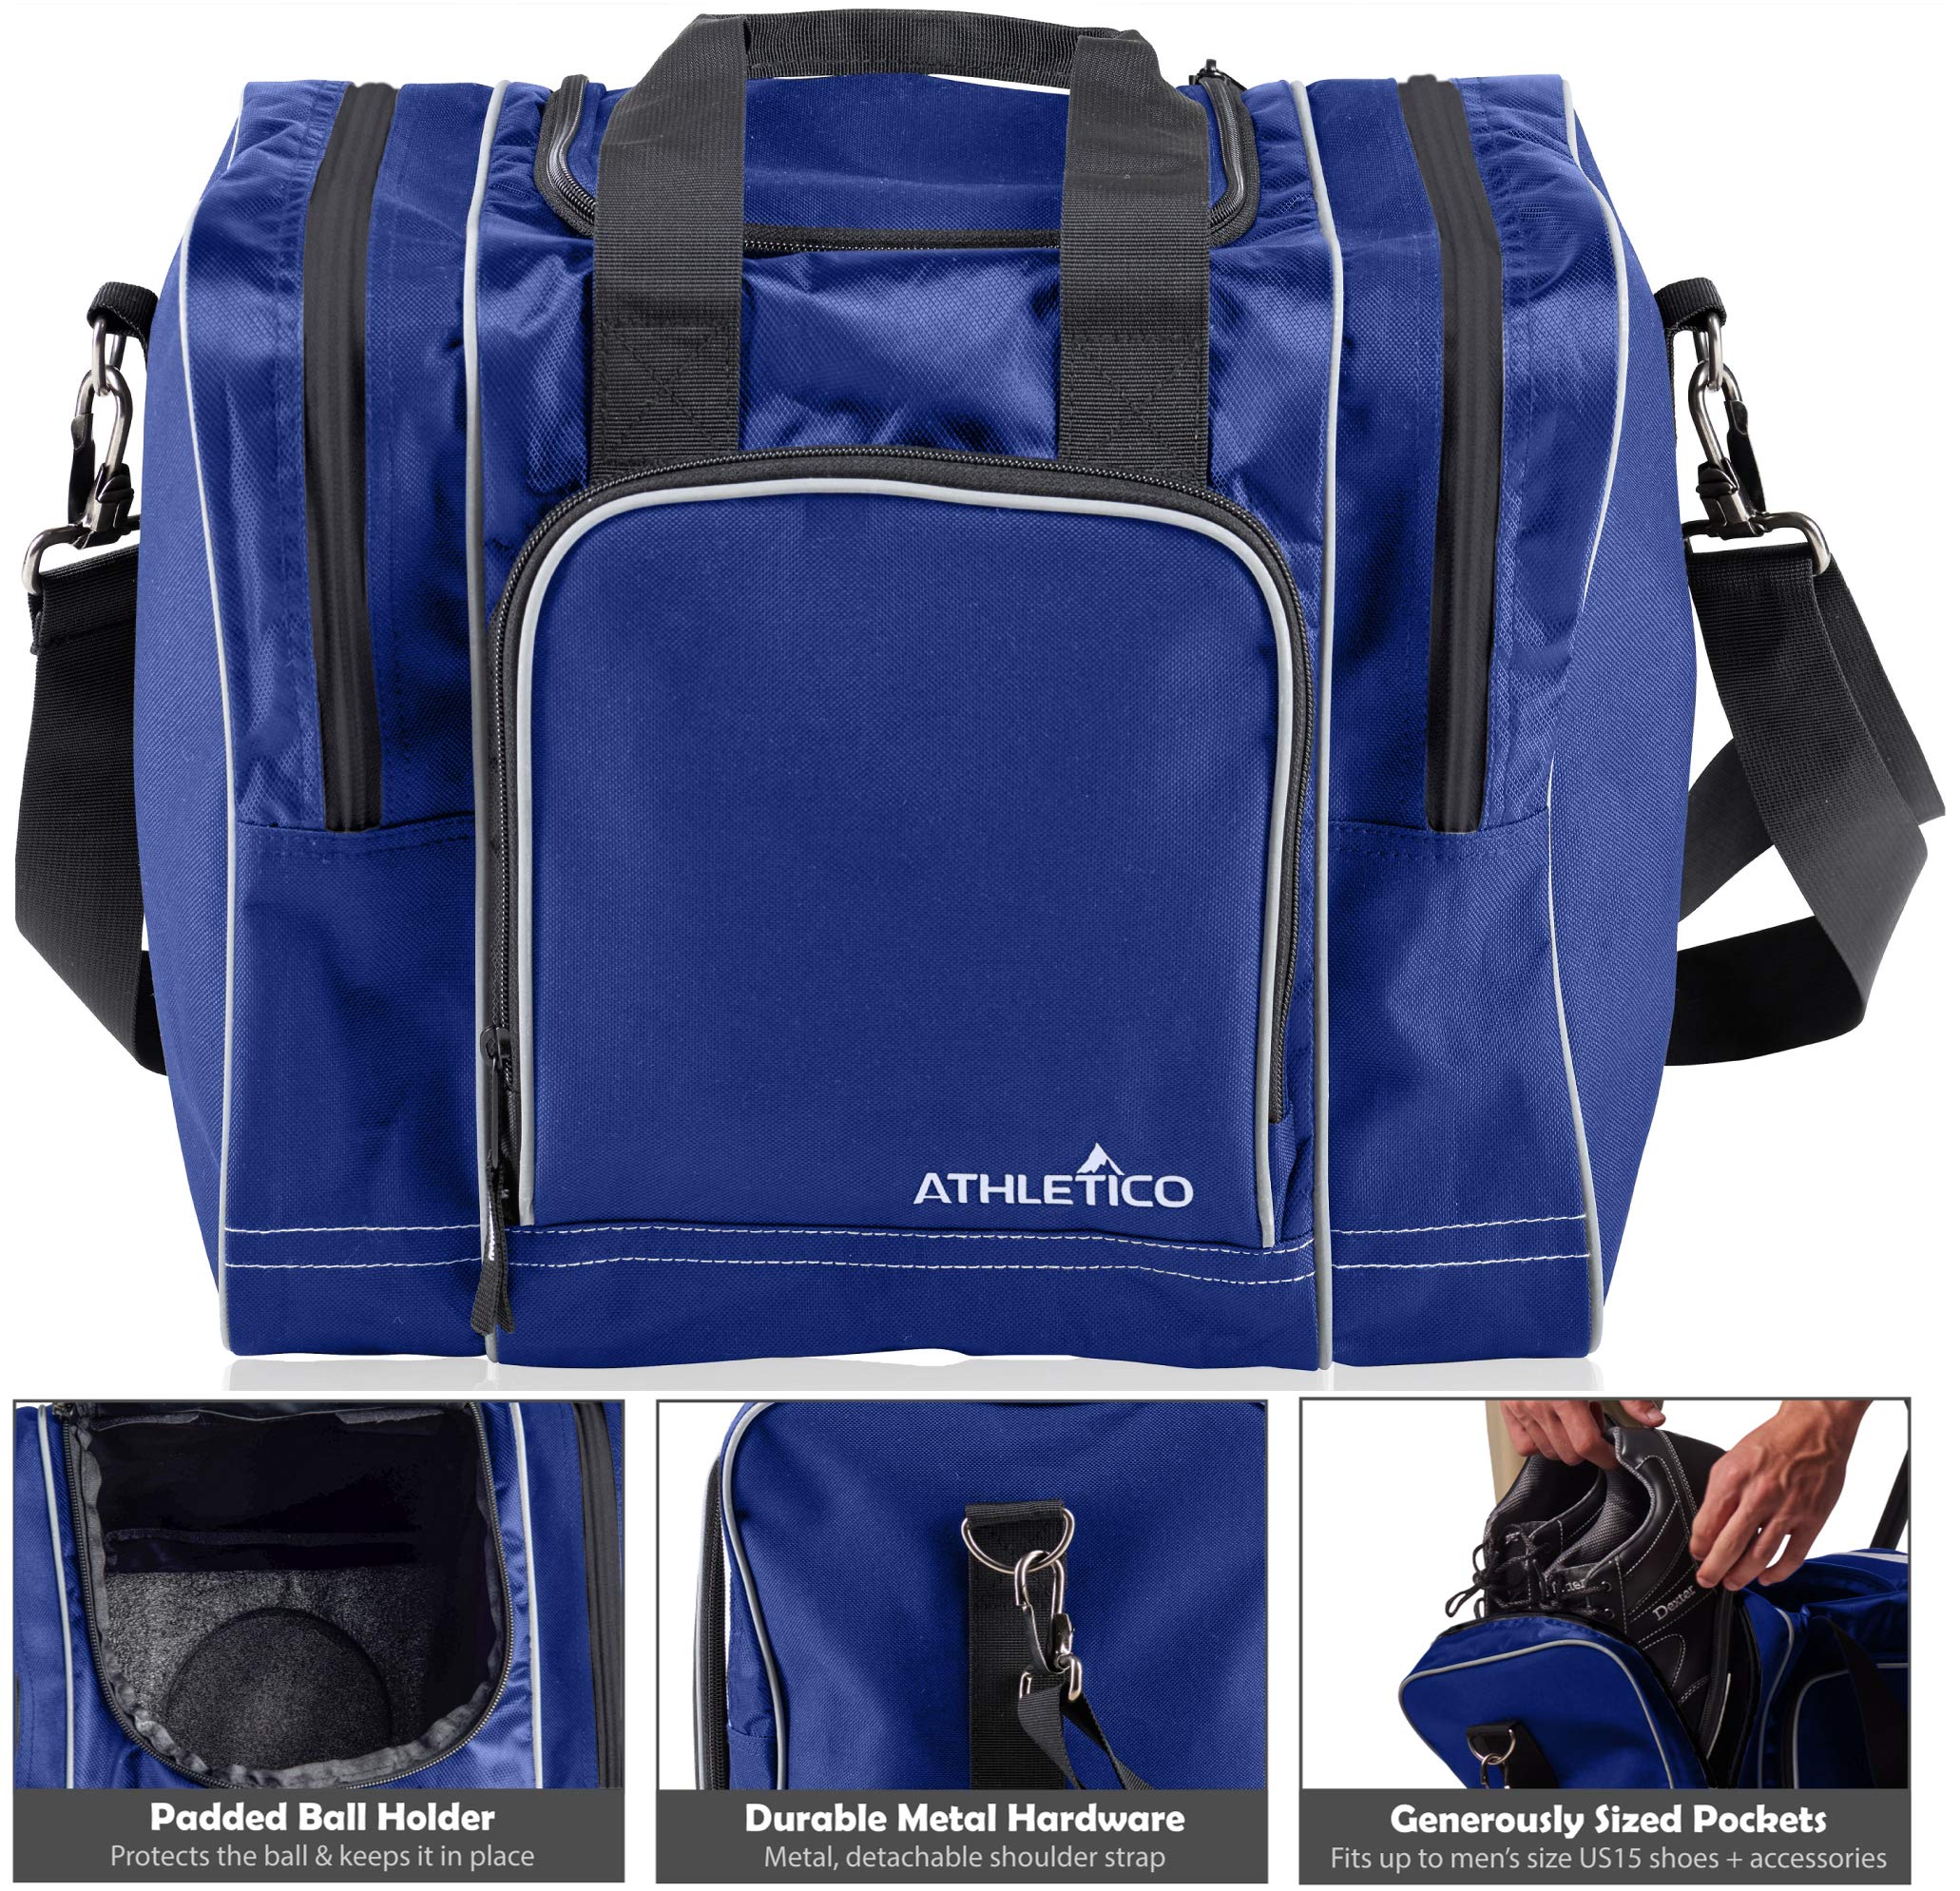 Athletico Bowling Bag for Single Ball - Single Ball Tote Bag With Padded Ball Holder - Fits a Single Pair of Bowling Shoes Up to Mens Size 14 (Blue)  - Like New